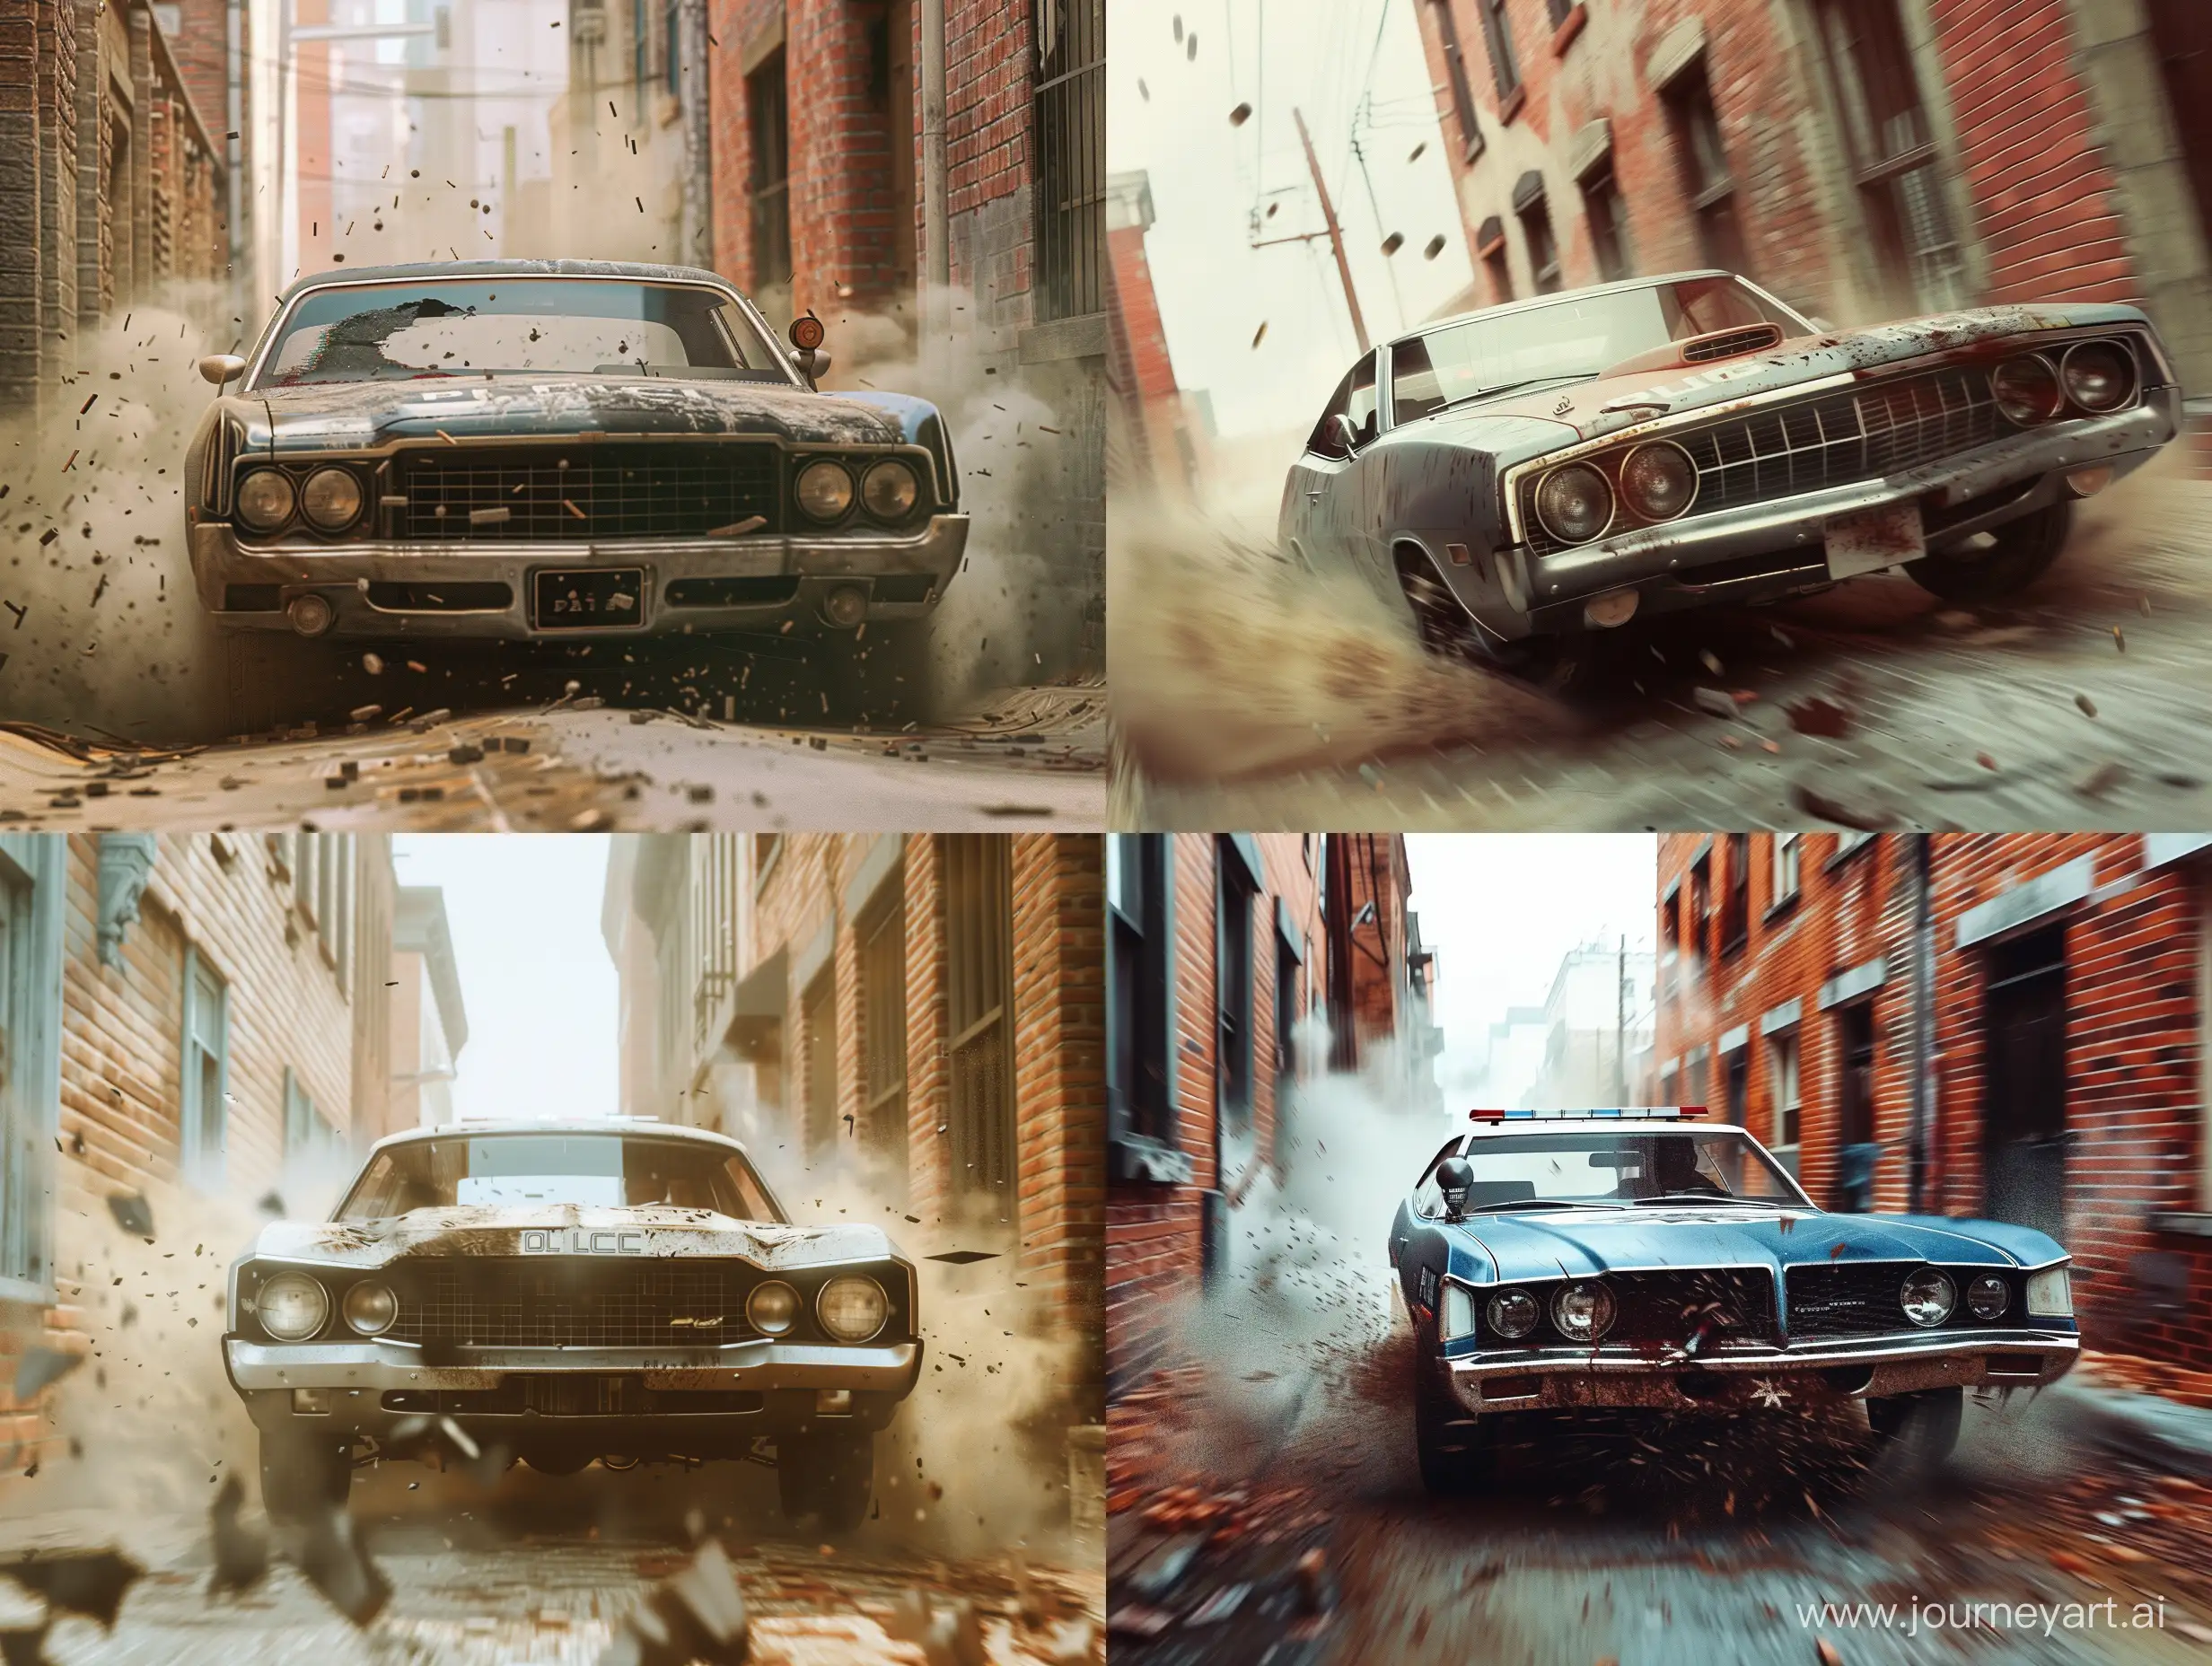 Retro-1970s-American-Police-Car-Chase-Through-Alley-with-Battered-Body-and-Bullet-Tracks